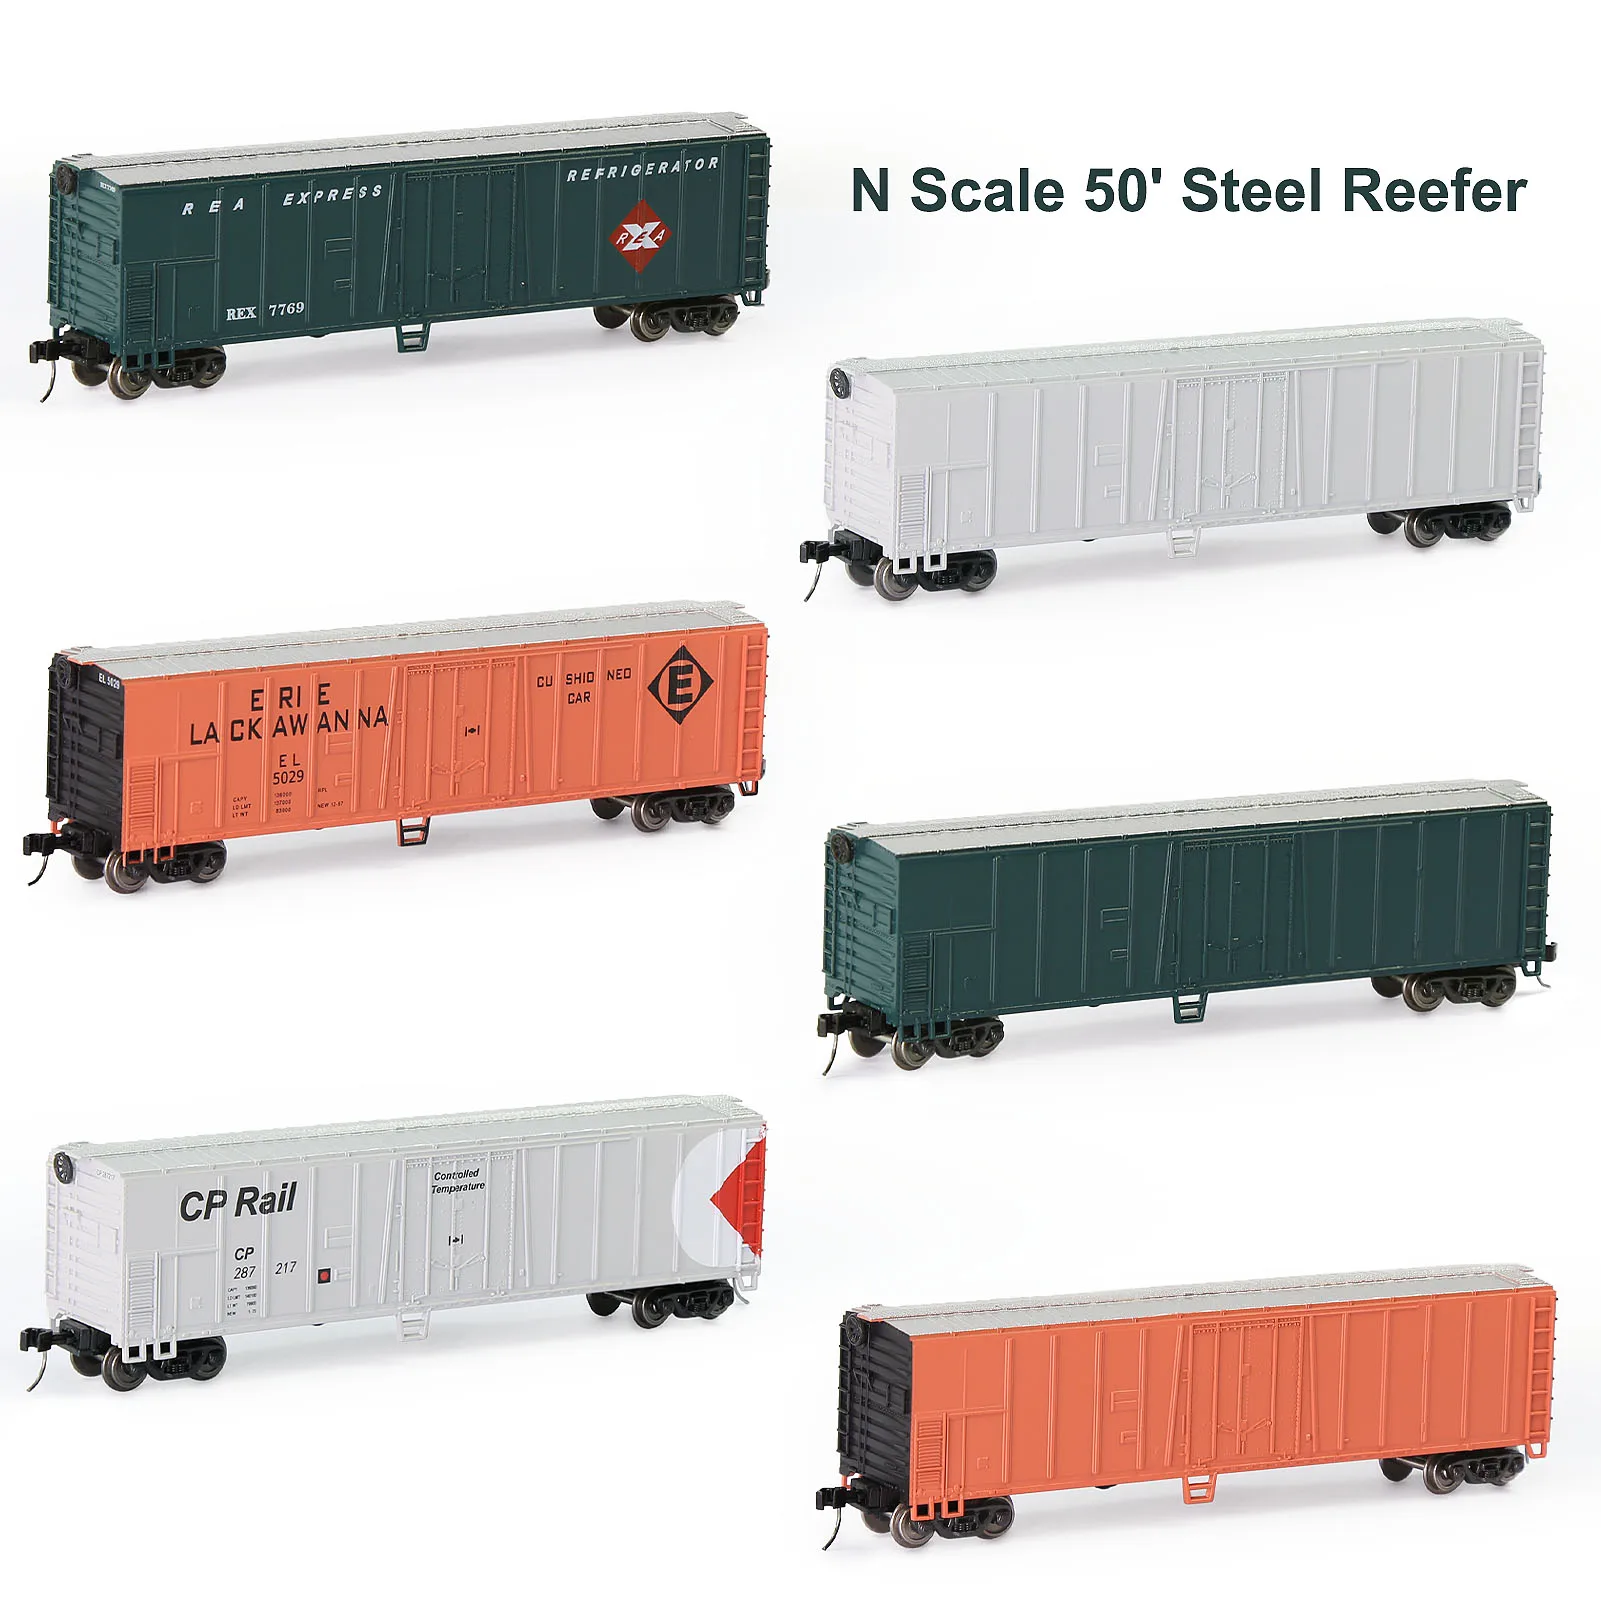 

C15015 Evemodel Wagons N Scale 1:160 50' Steel Reefer 50ft Boxcar Freight Car (Pack of 3)